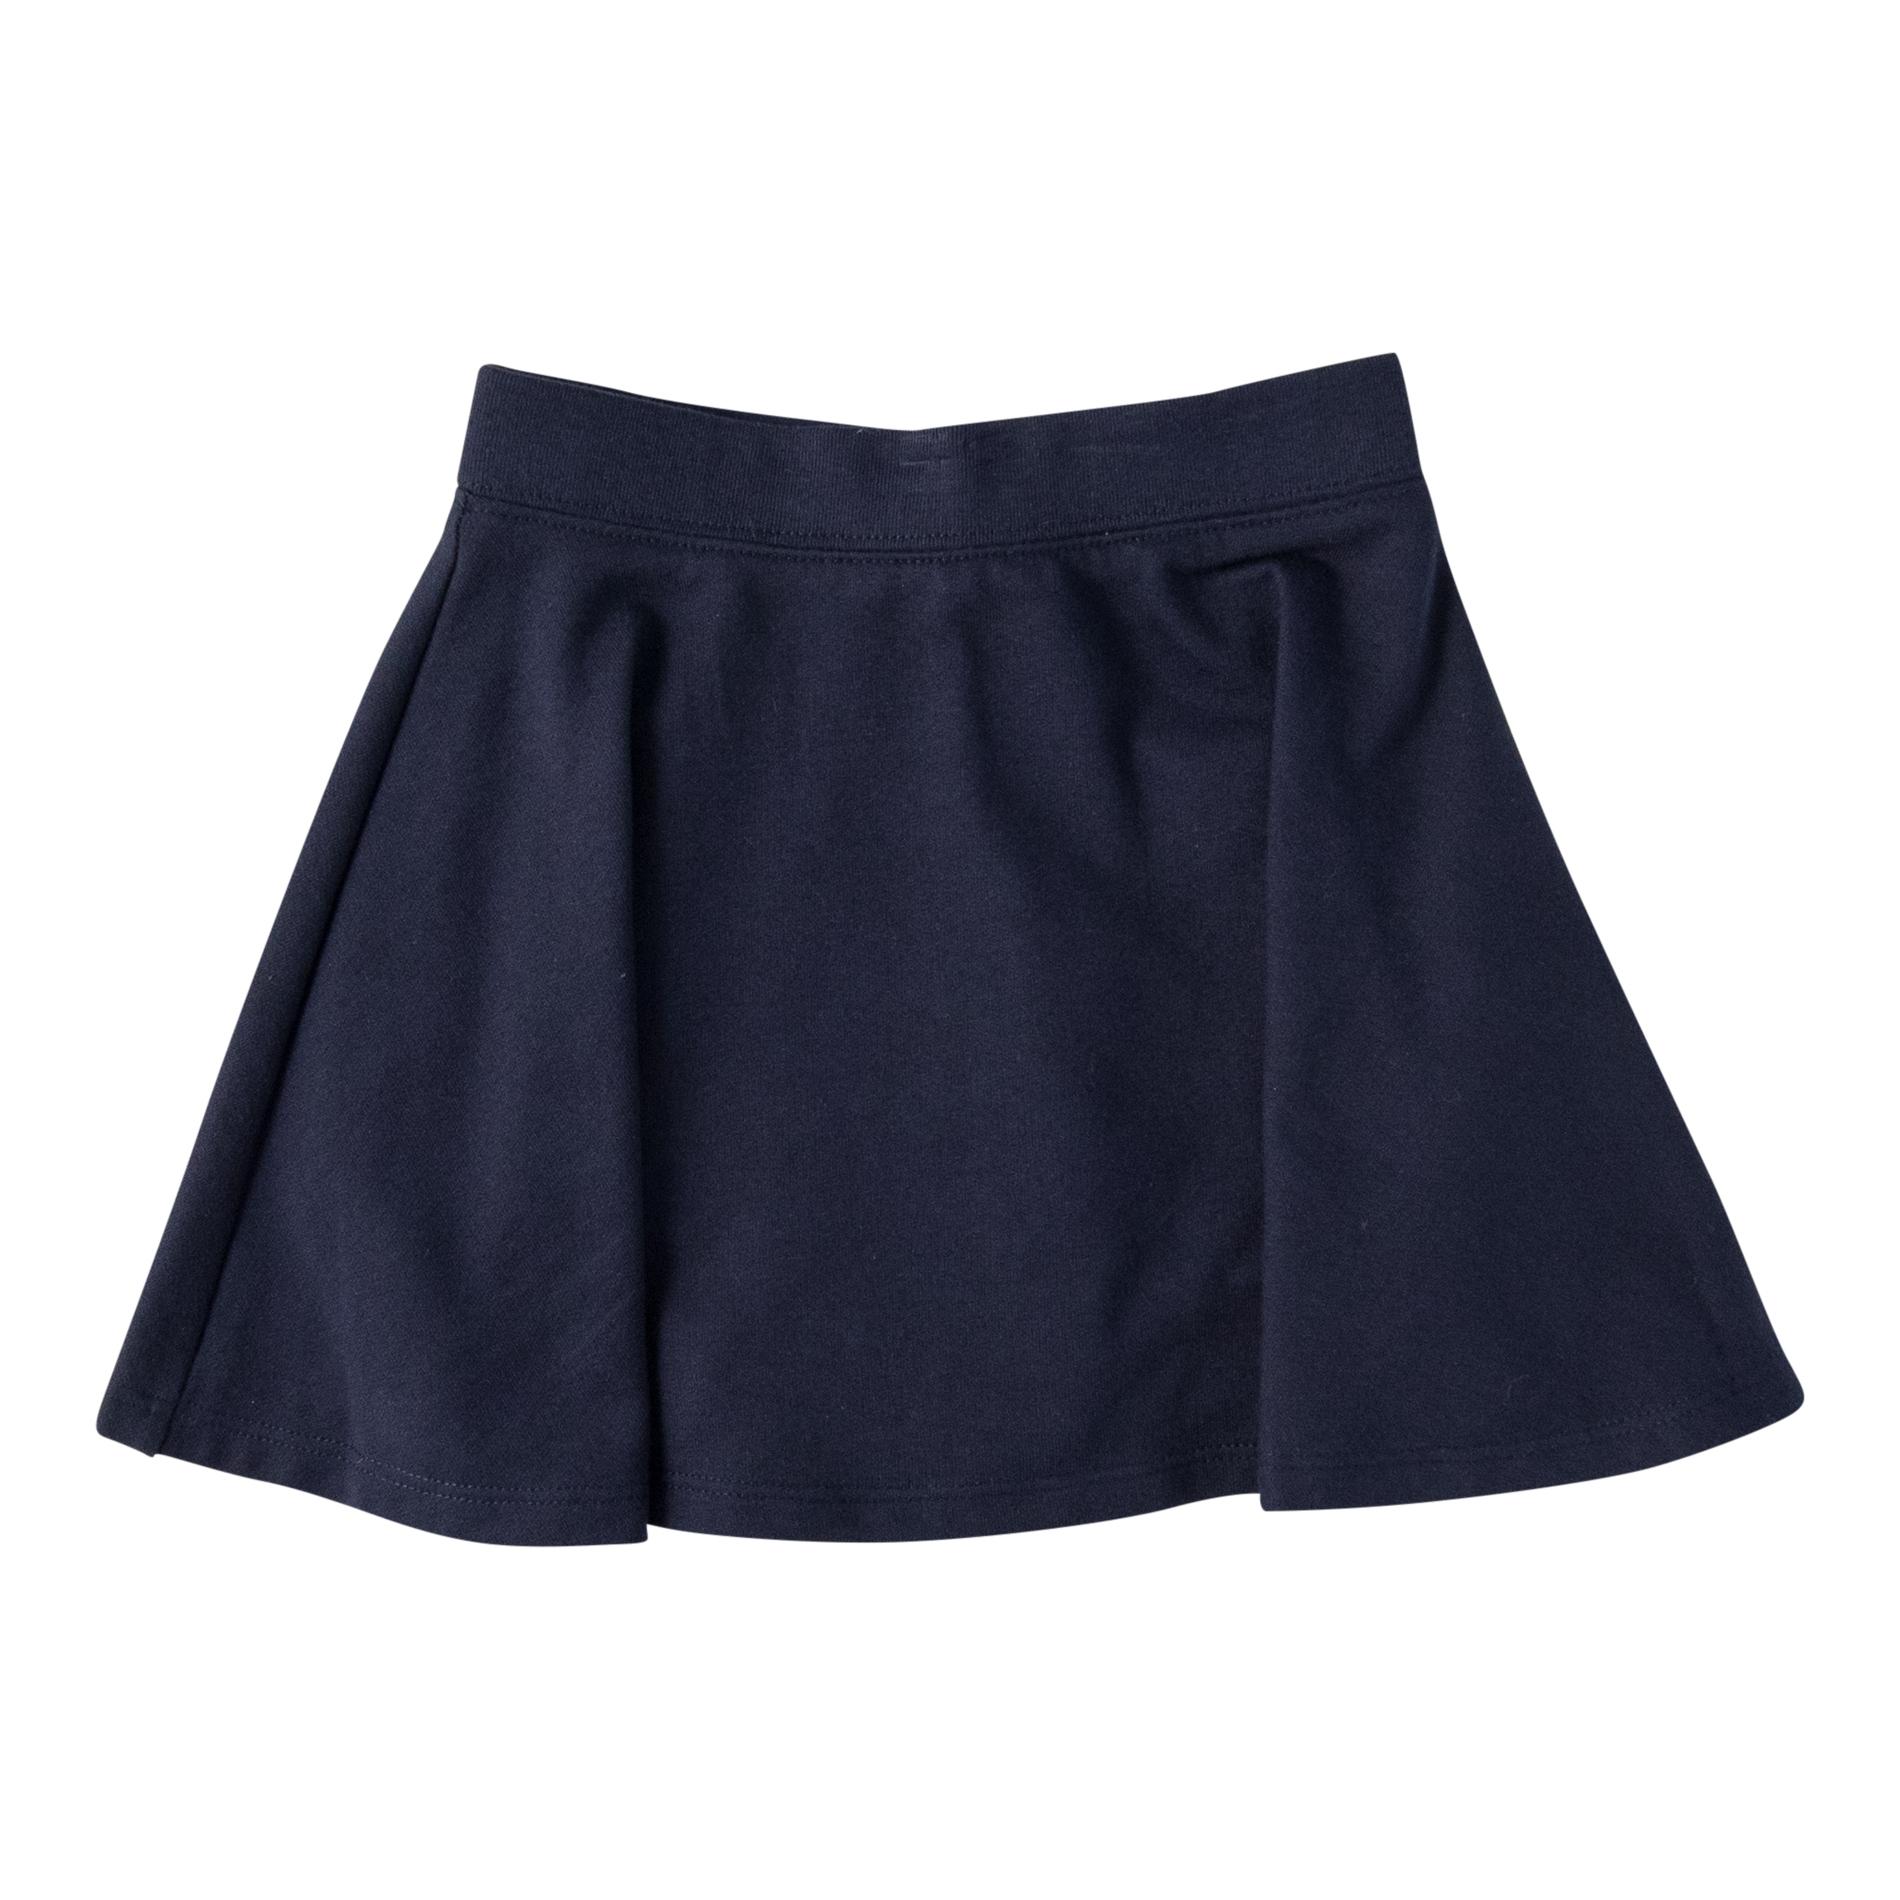 Dockers Girl's French Terry Knit Scooter Skirt